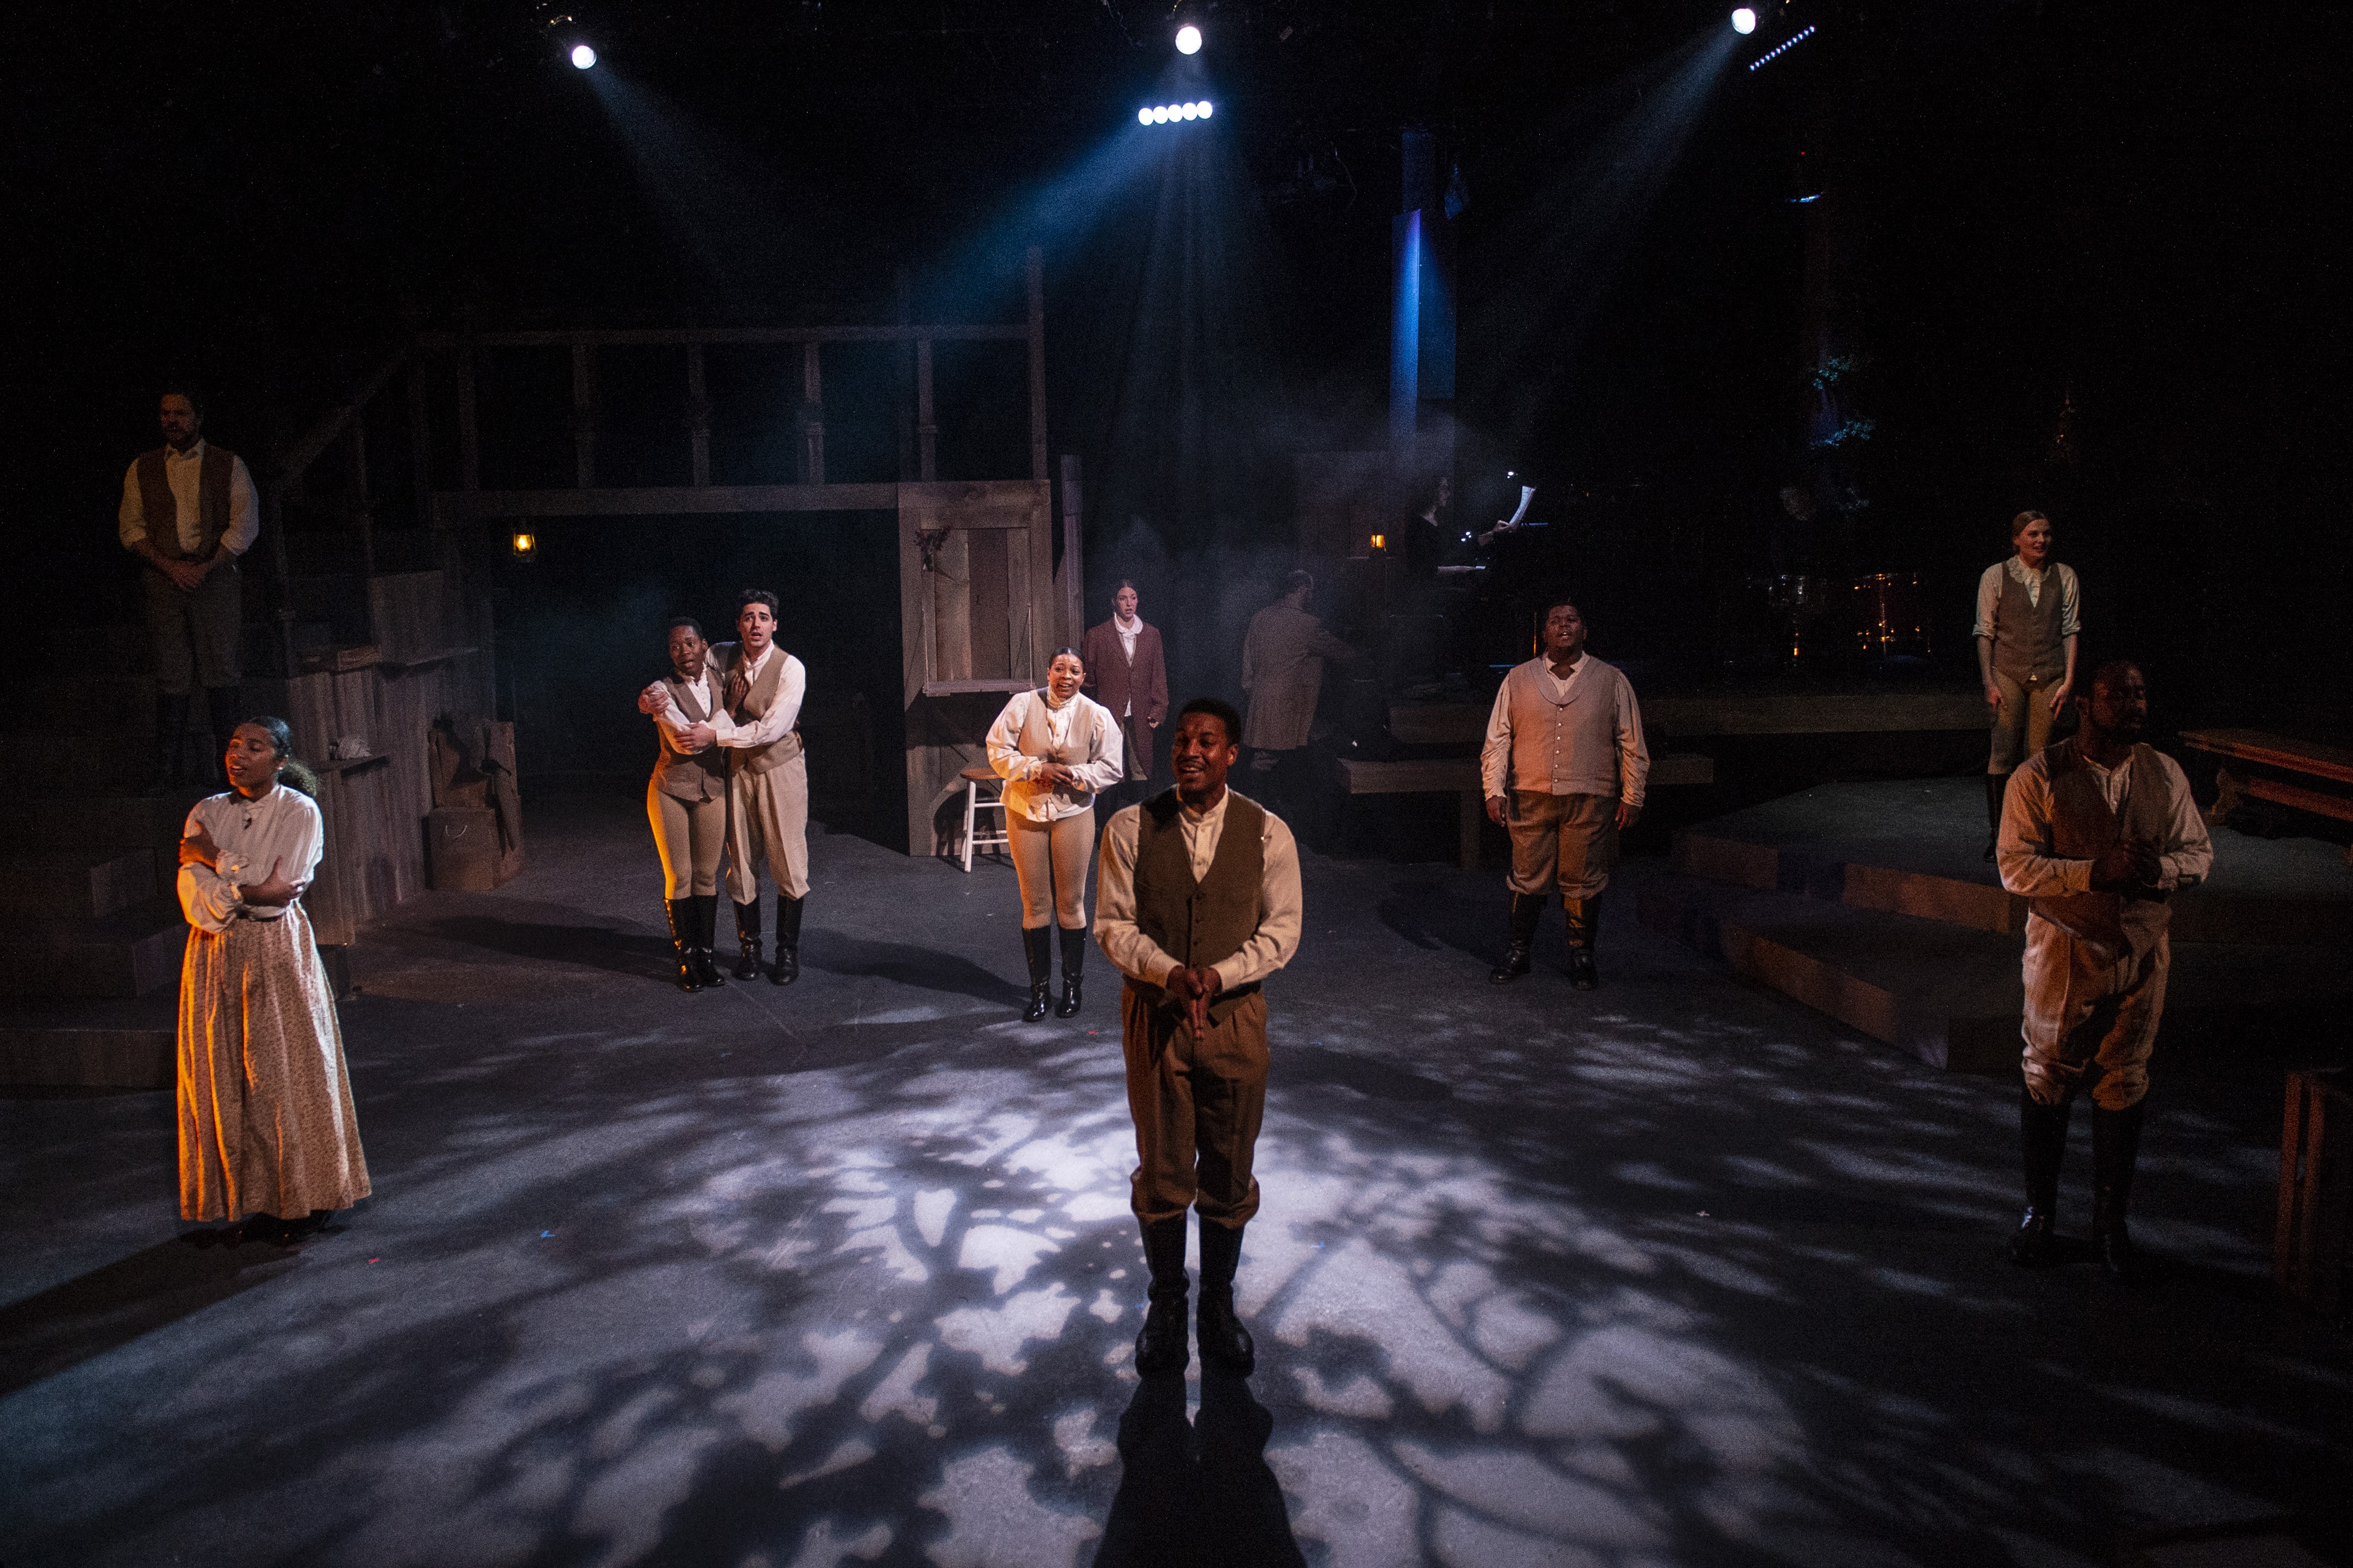 (l-r) Russell Rinker, Karma Price, Billie Krishawn, Ayanna Hardy, Suzy Alden, Gary L. Perkins III, Joshua Simon, Demitrus Carter, Rebecca Ballinger, and V. Savoy McIlwain in "A Civil War Christmas" at 1st Stage. Photo by Teresa Castracane. 